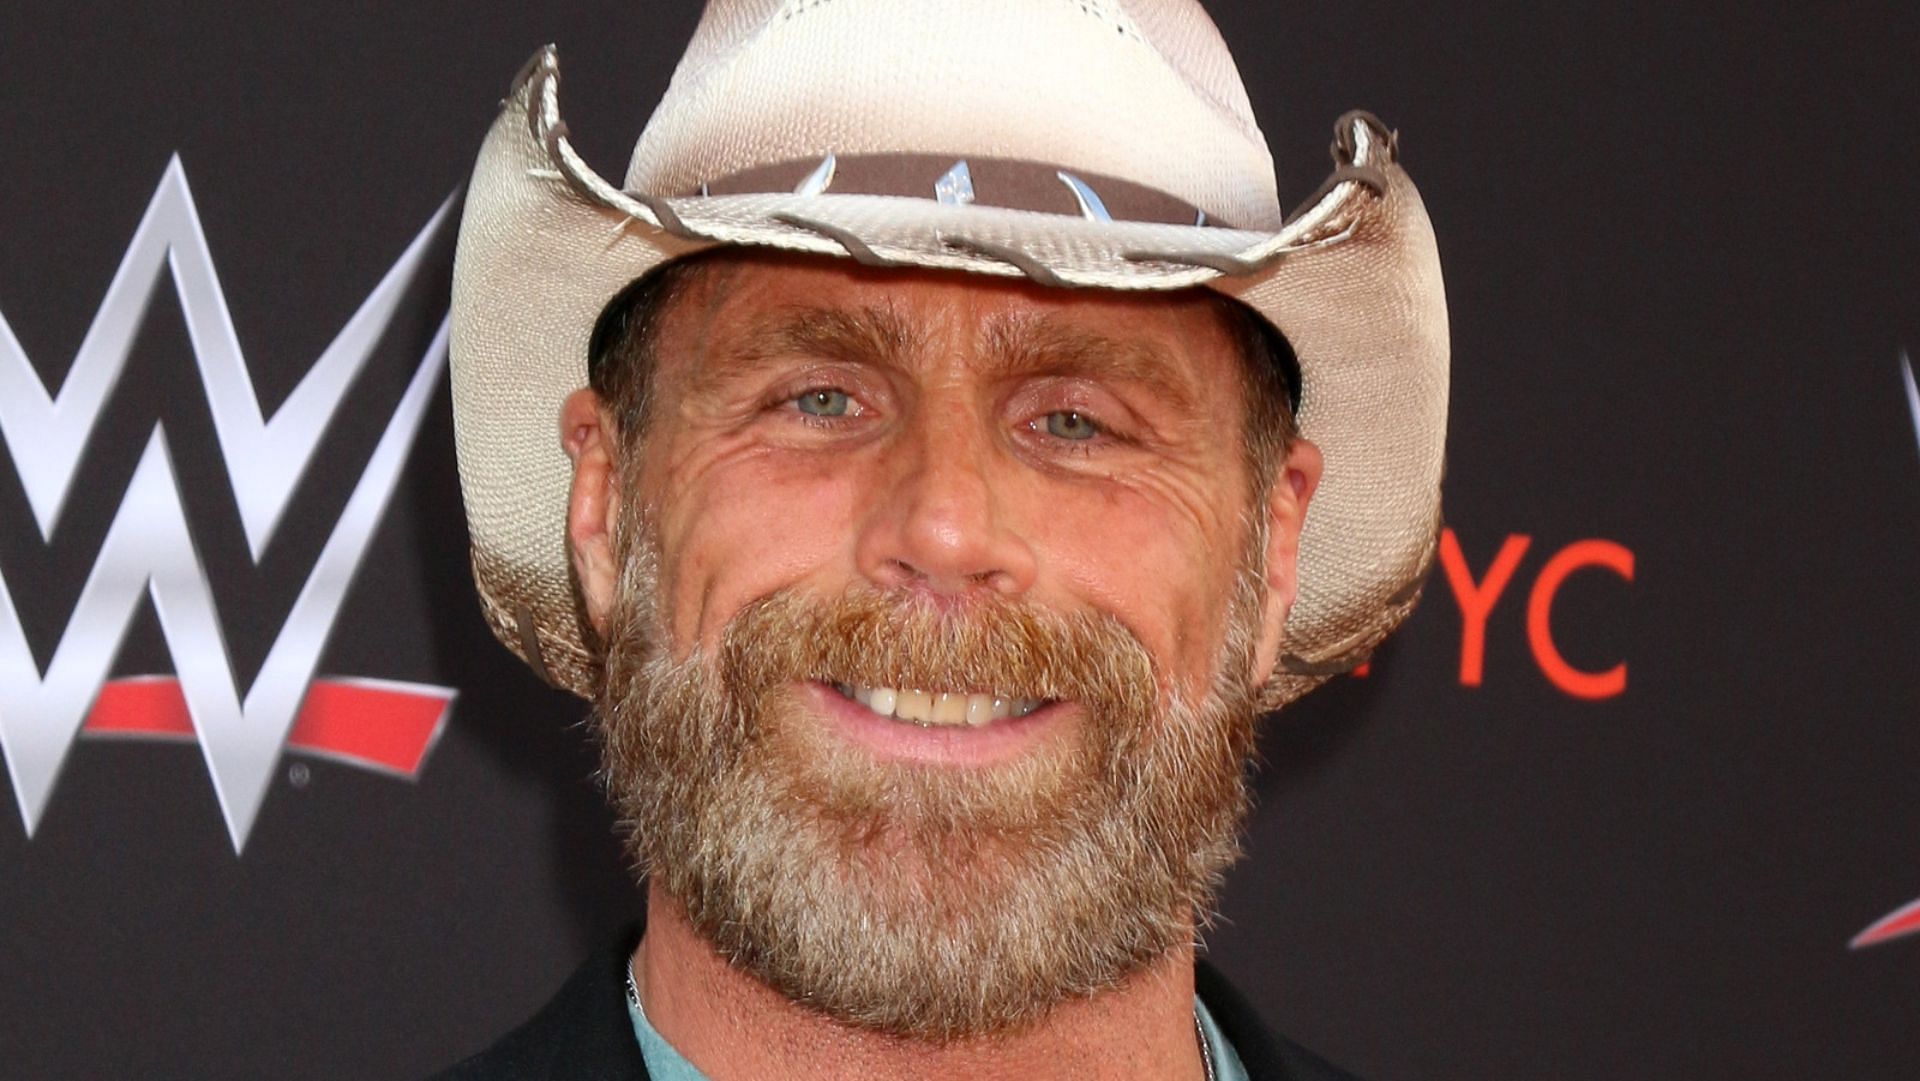 Shawn Michaels is one WWE greatest ever performers.